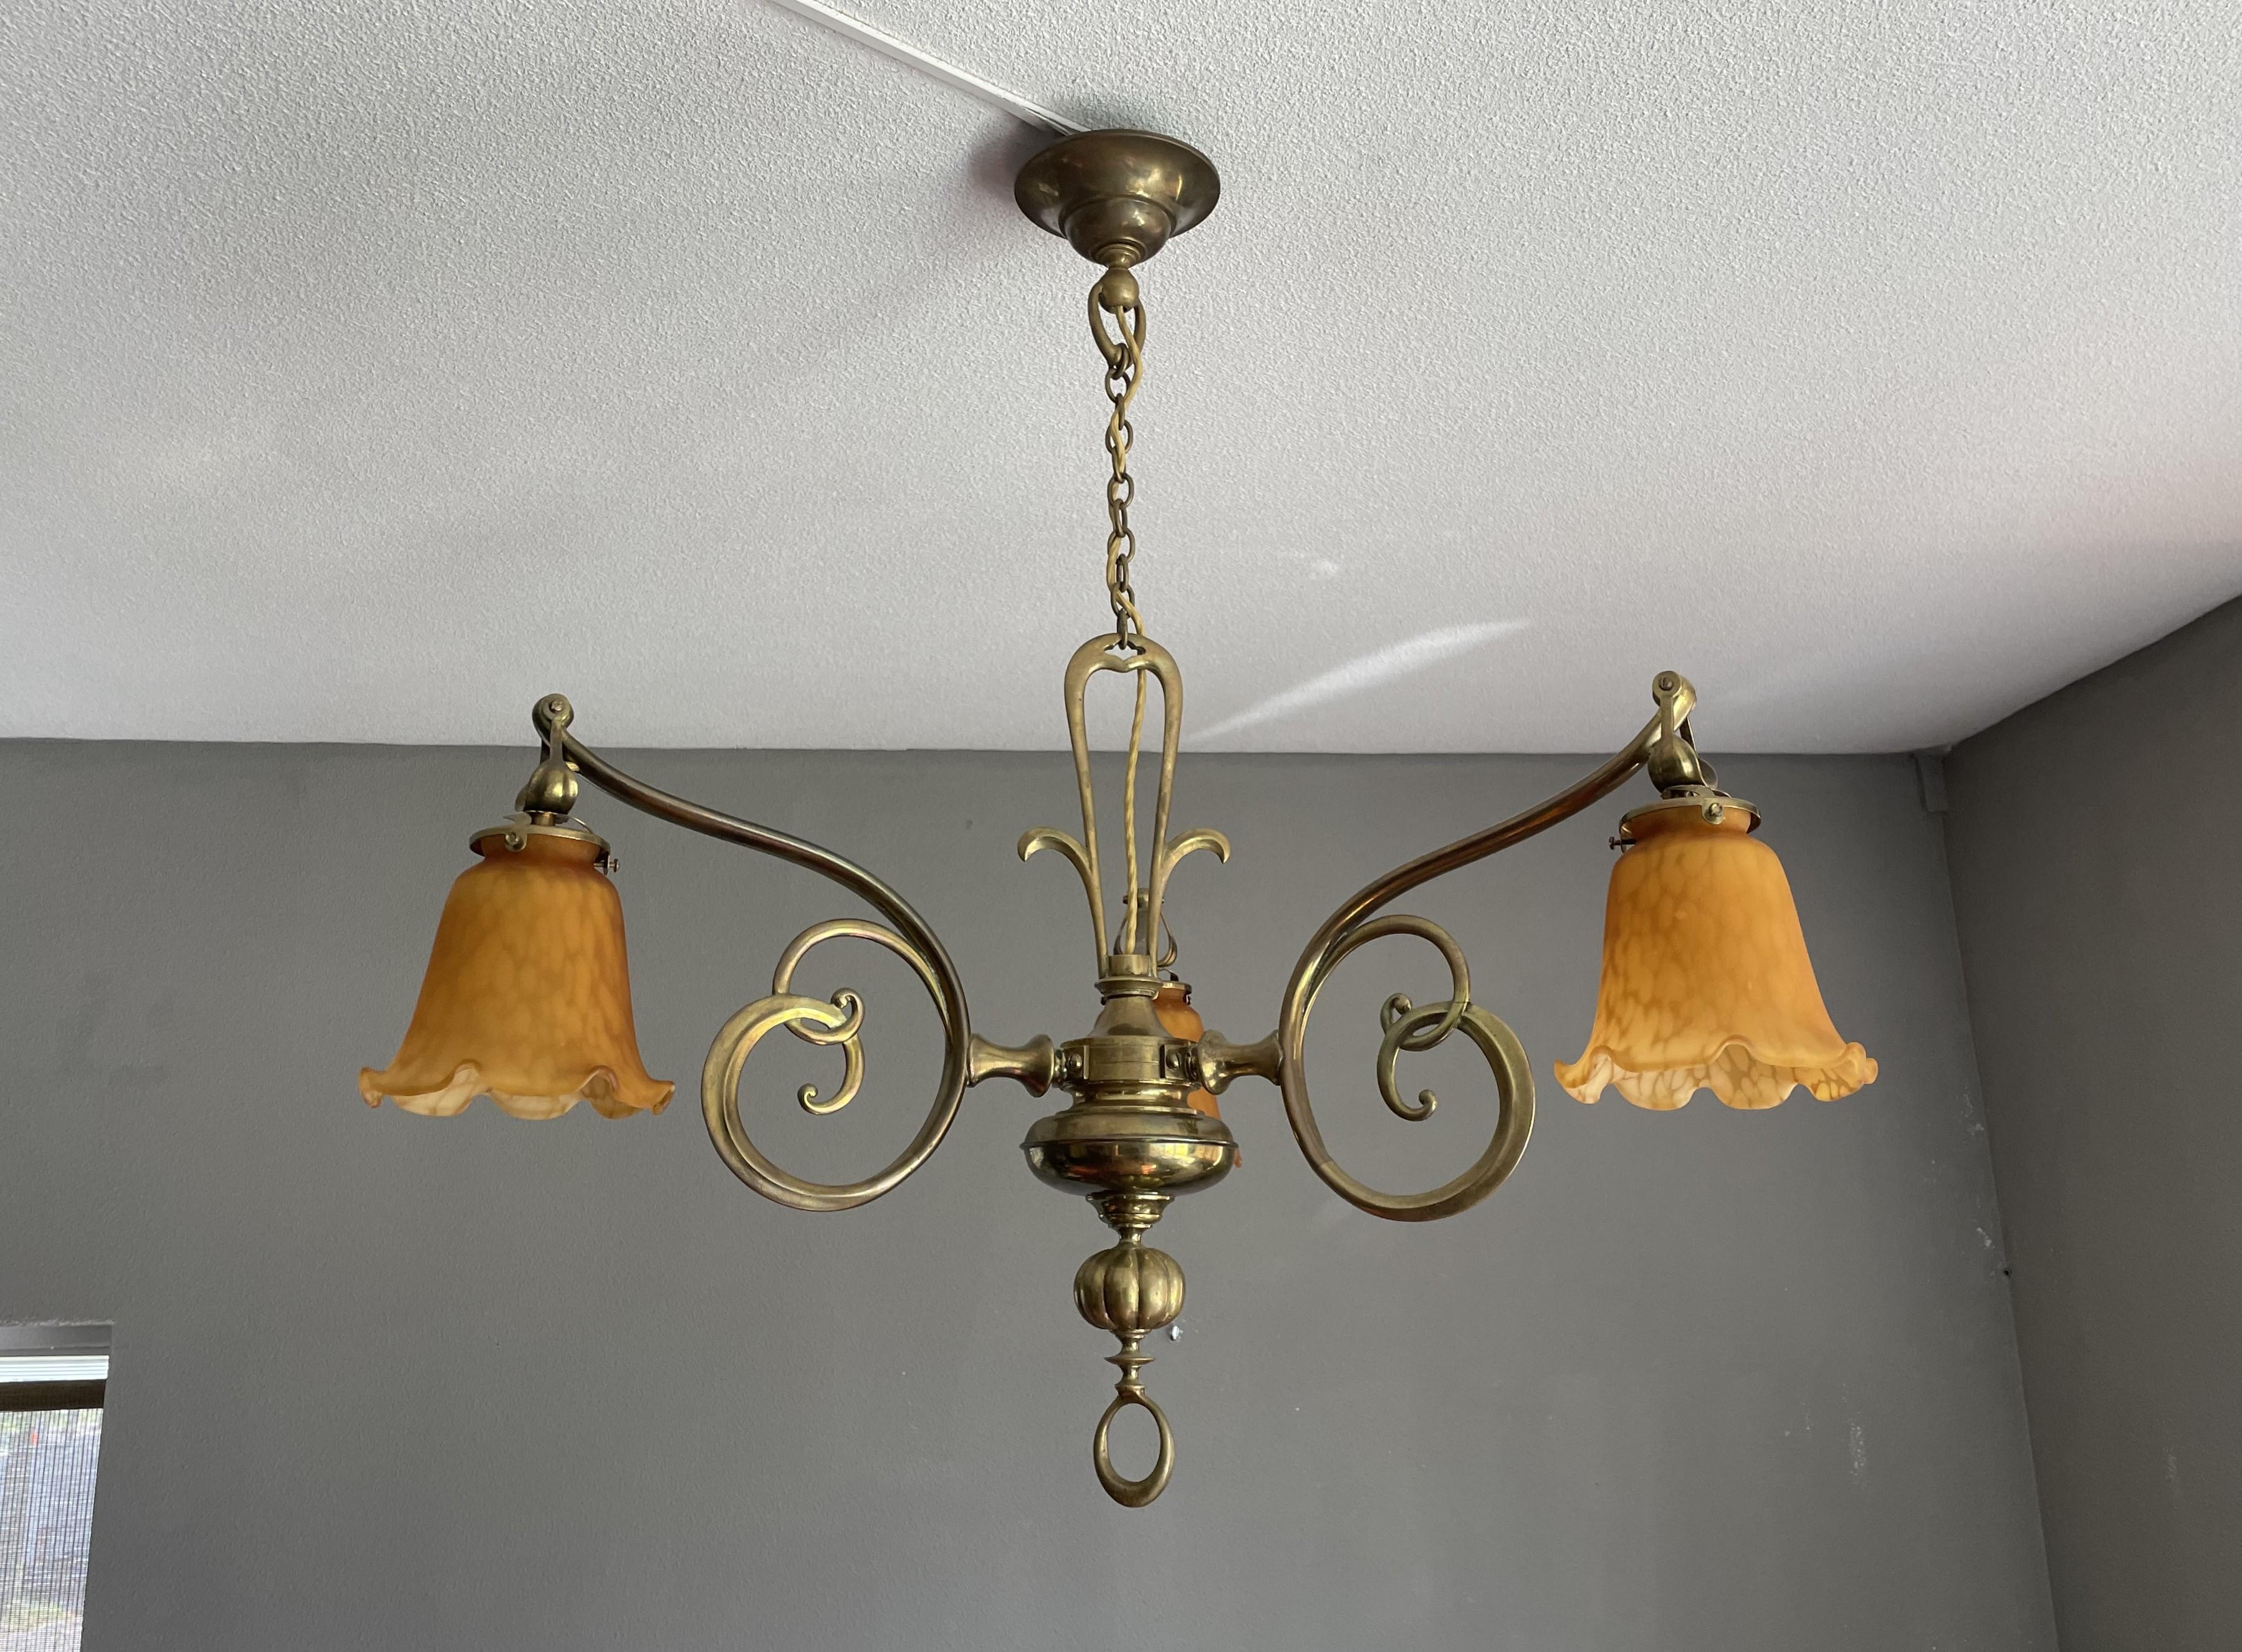 Magnificent chandelier with stunning patina and perfect art glass shades. 

This rare and extremely elegant Art Nouveau pendant dates from the earliest days of European, indoor lighting. This chandelier in a stunning Art Nouveau style is